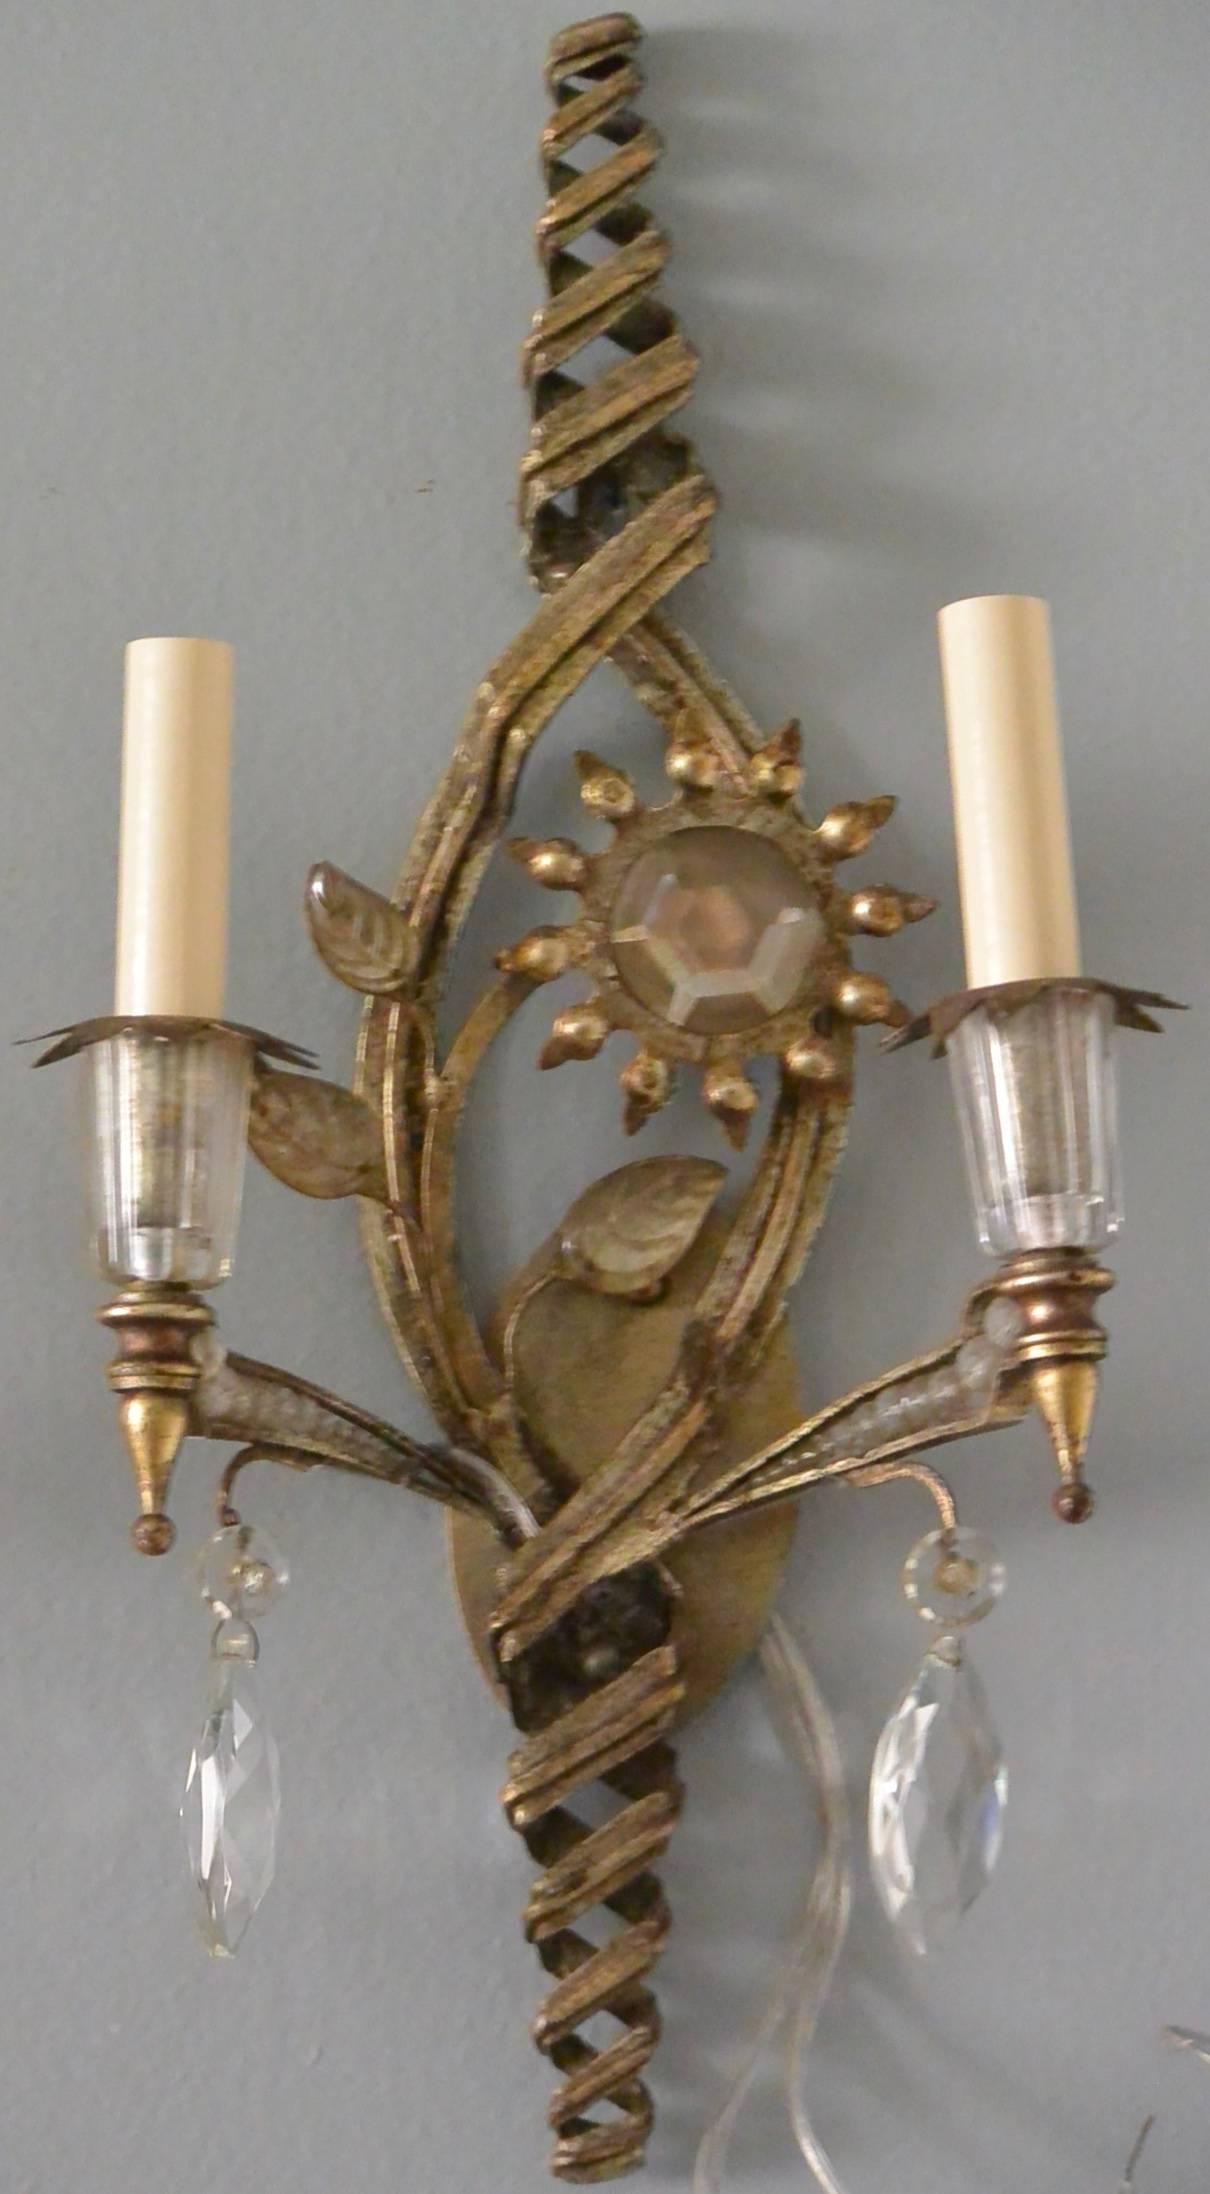 Set of three vintage mirrored glass sconces, newly electrified. Italy, circa 1940.
Dimensions: 9.5